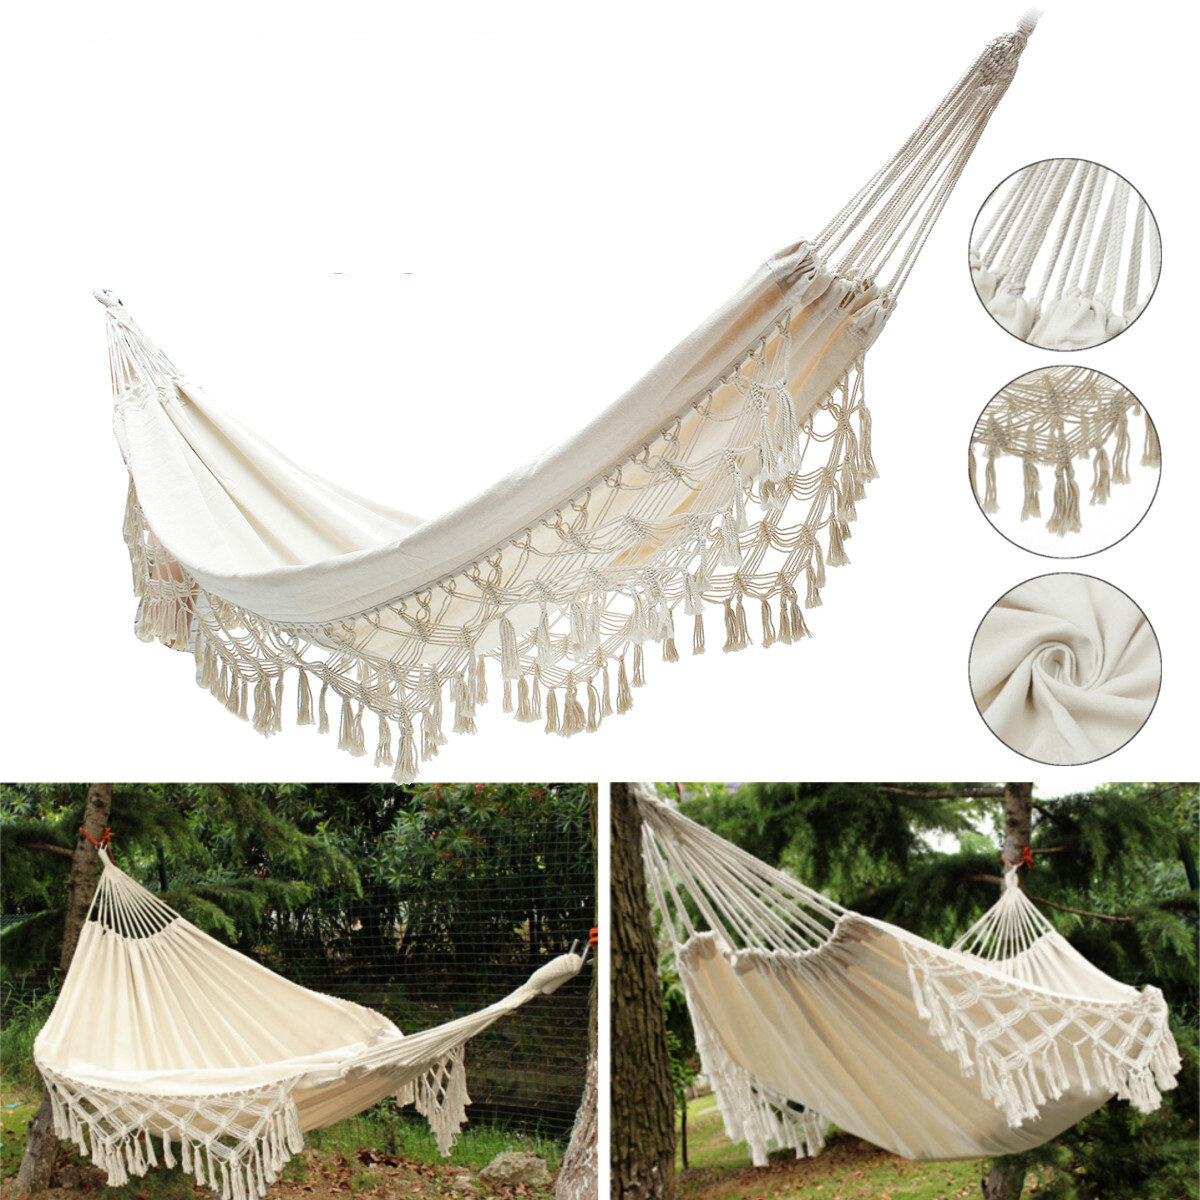 240x150CM Large Double Cotton Hammock Fringe Swing Beach Yard Hanging Chair Bed